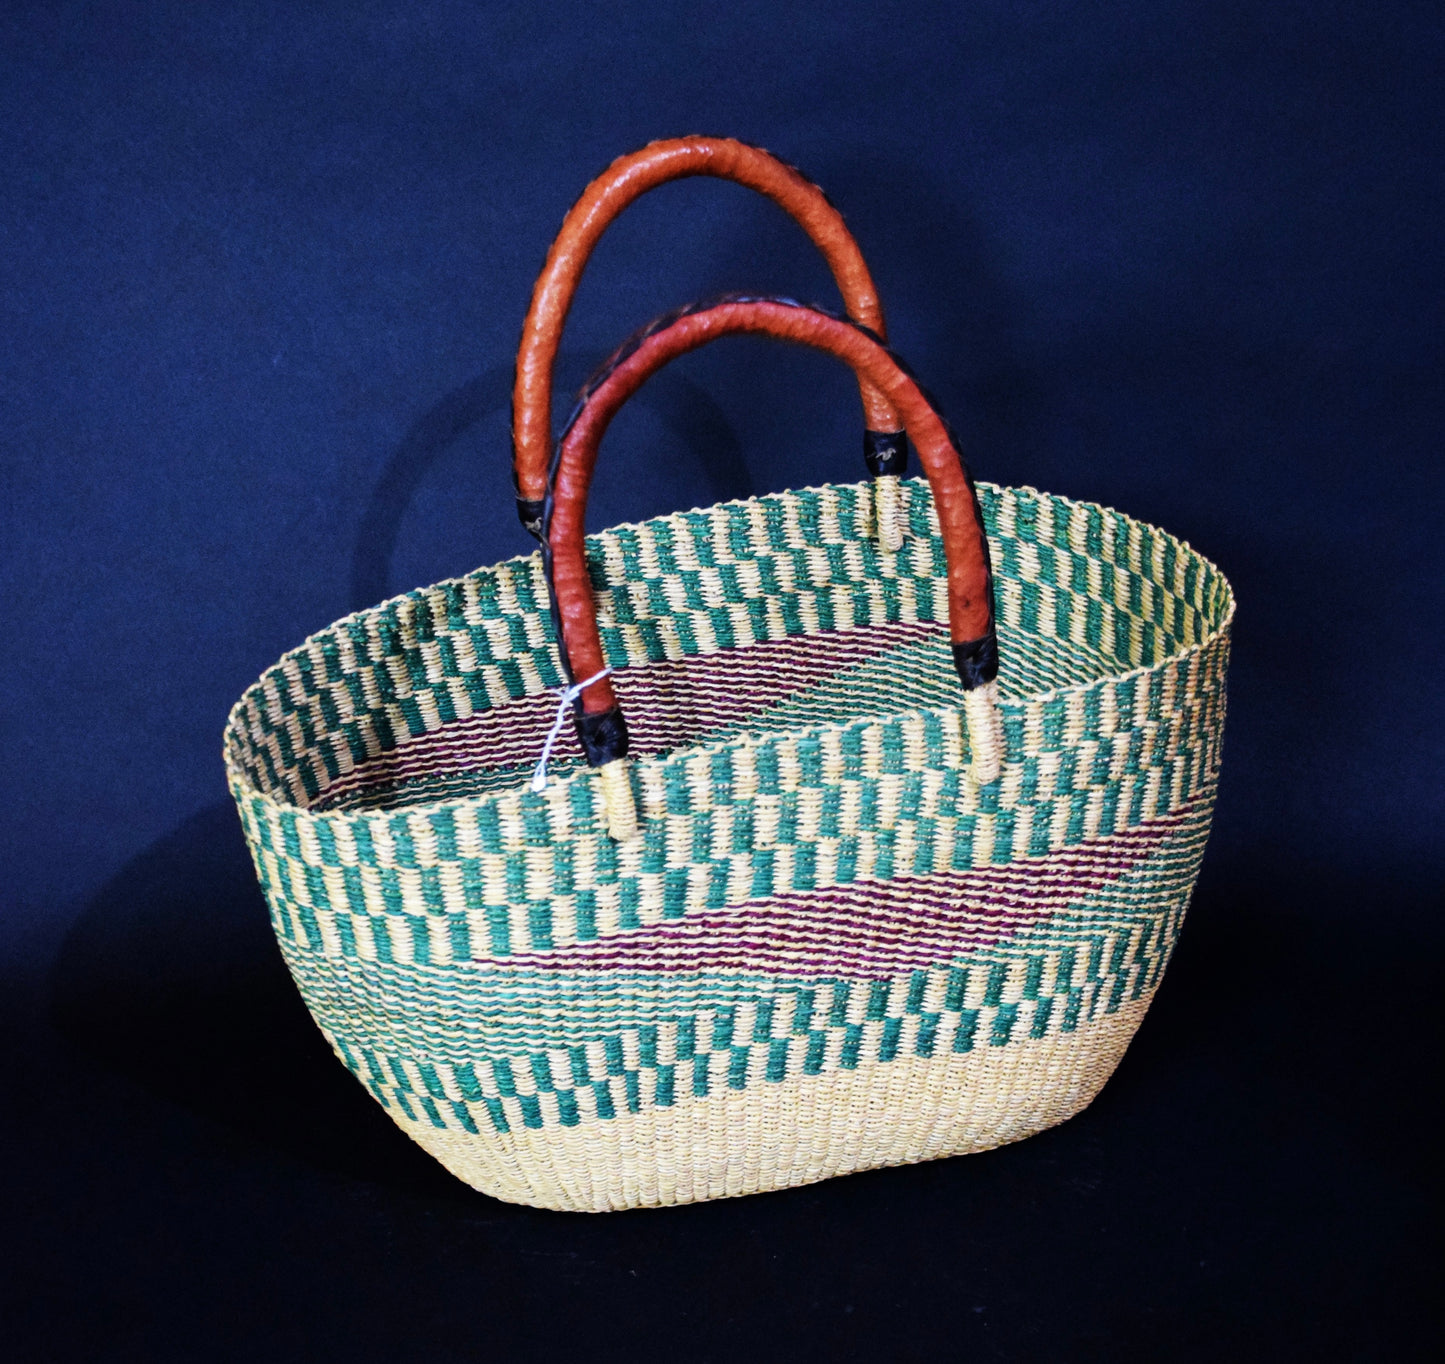 Jewelry and basket